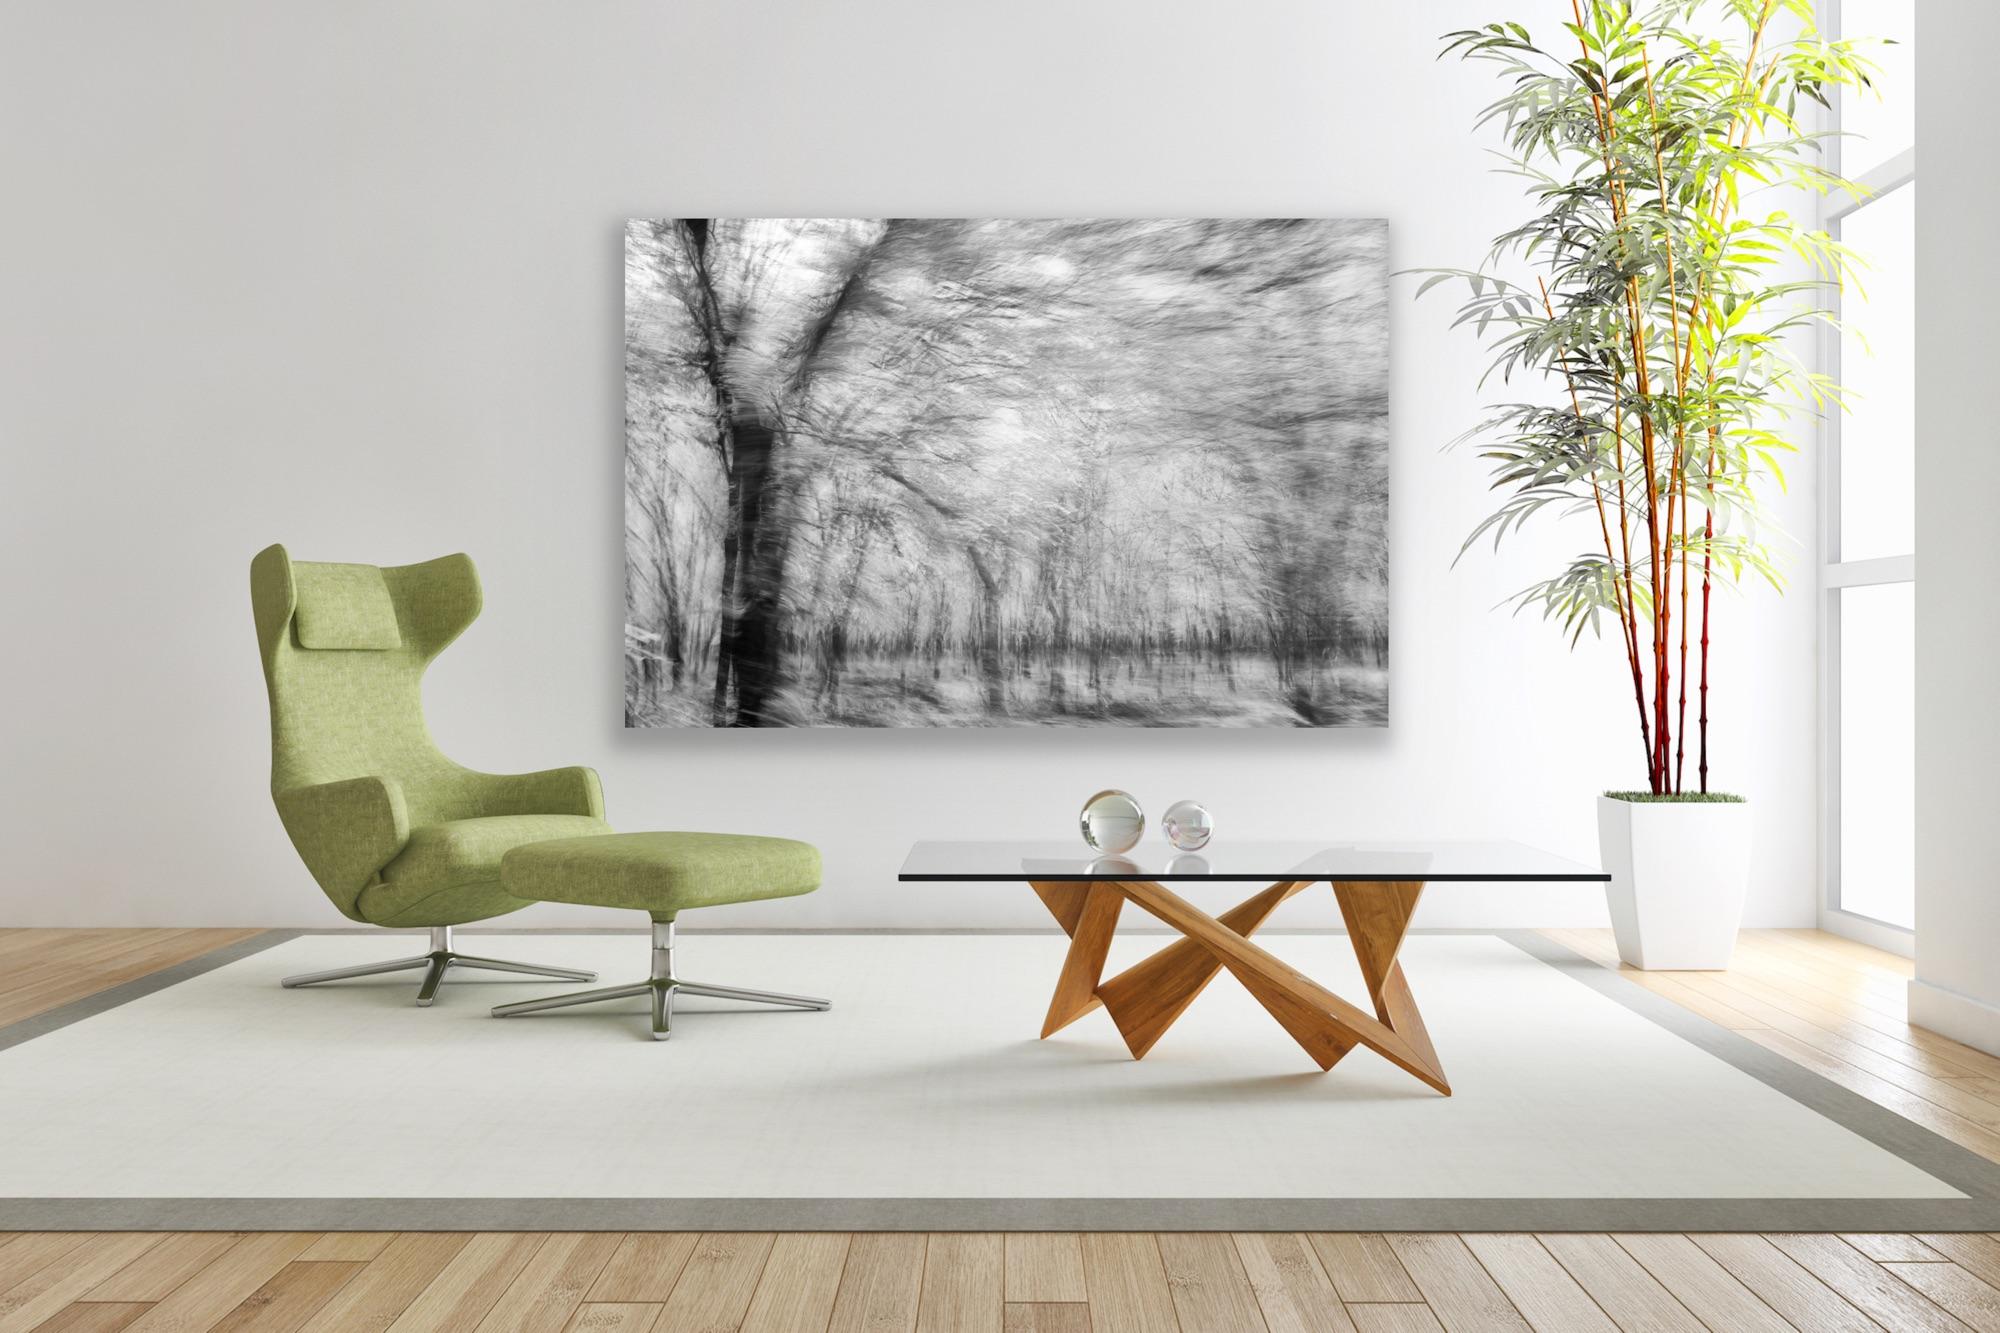  Landscape Photograph Nature Large Abstract Trees Wildlife India Black White For Sale 7